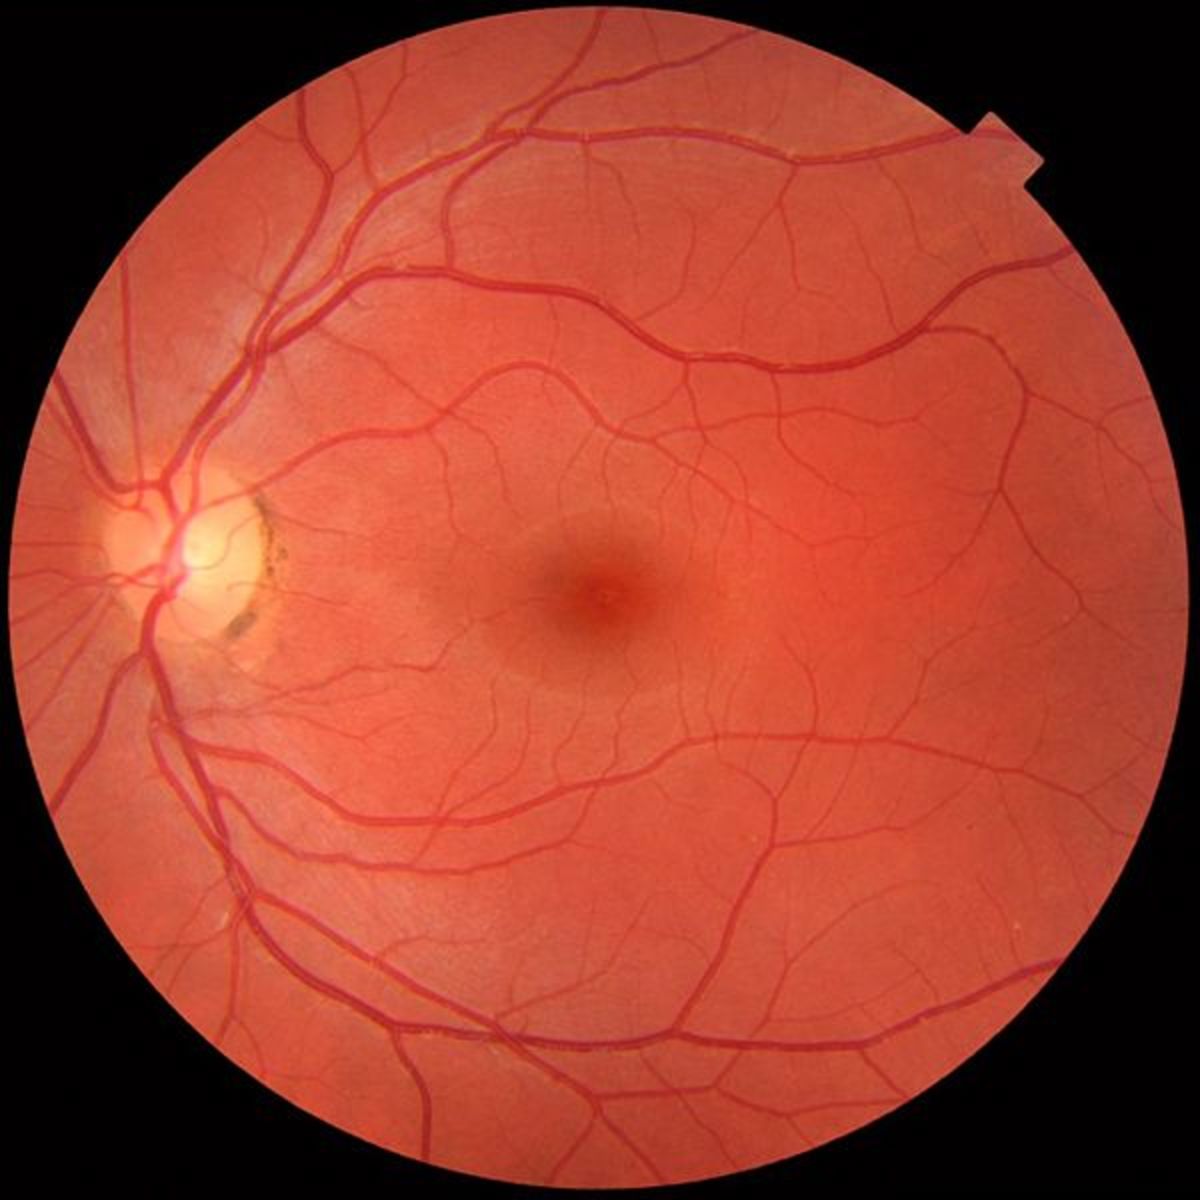 Definition of Retina: Anatomy, Function, and Diseases